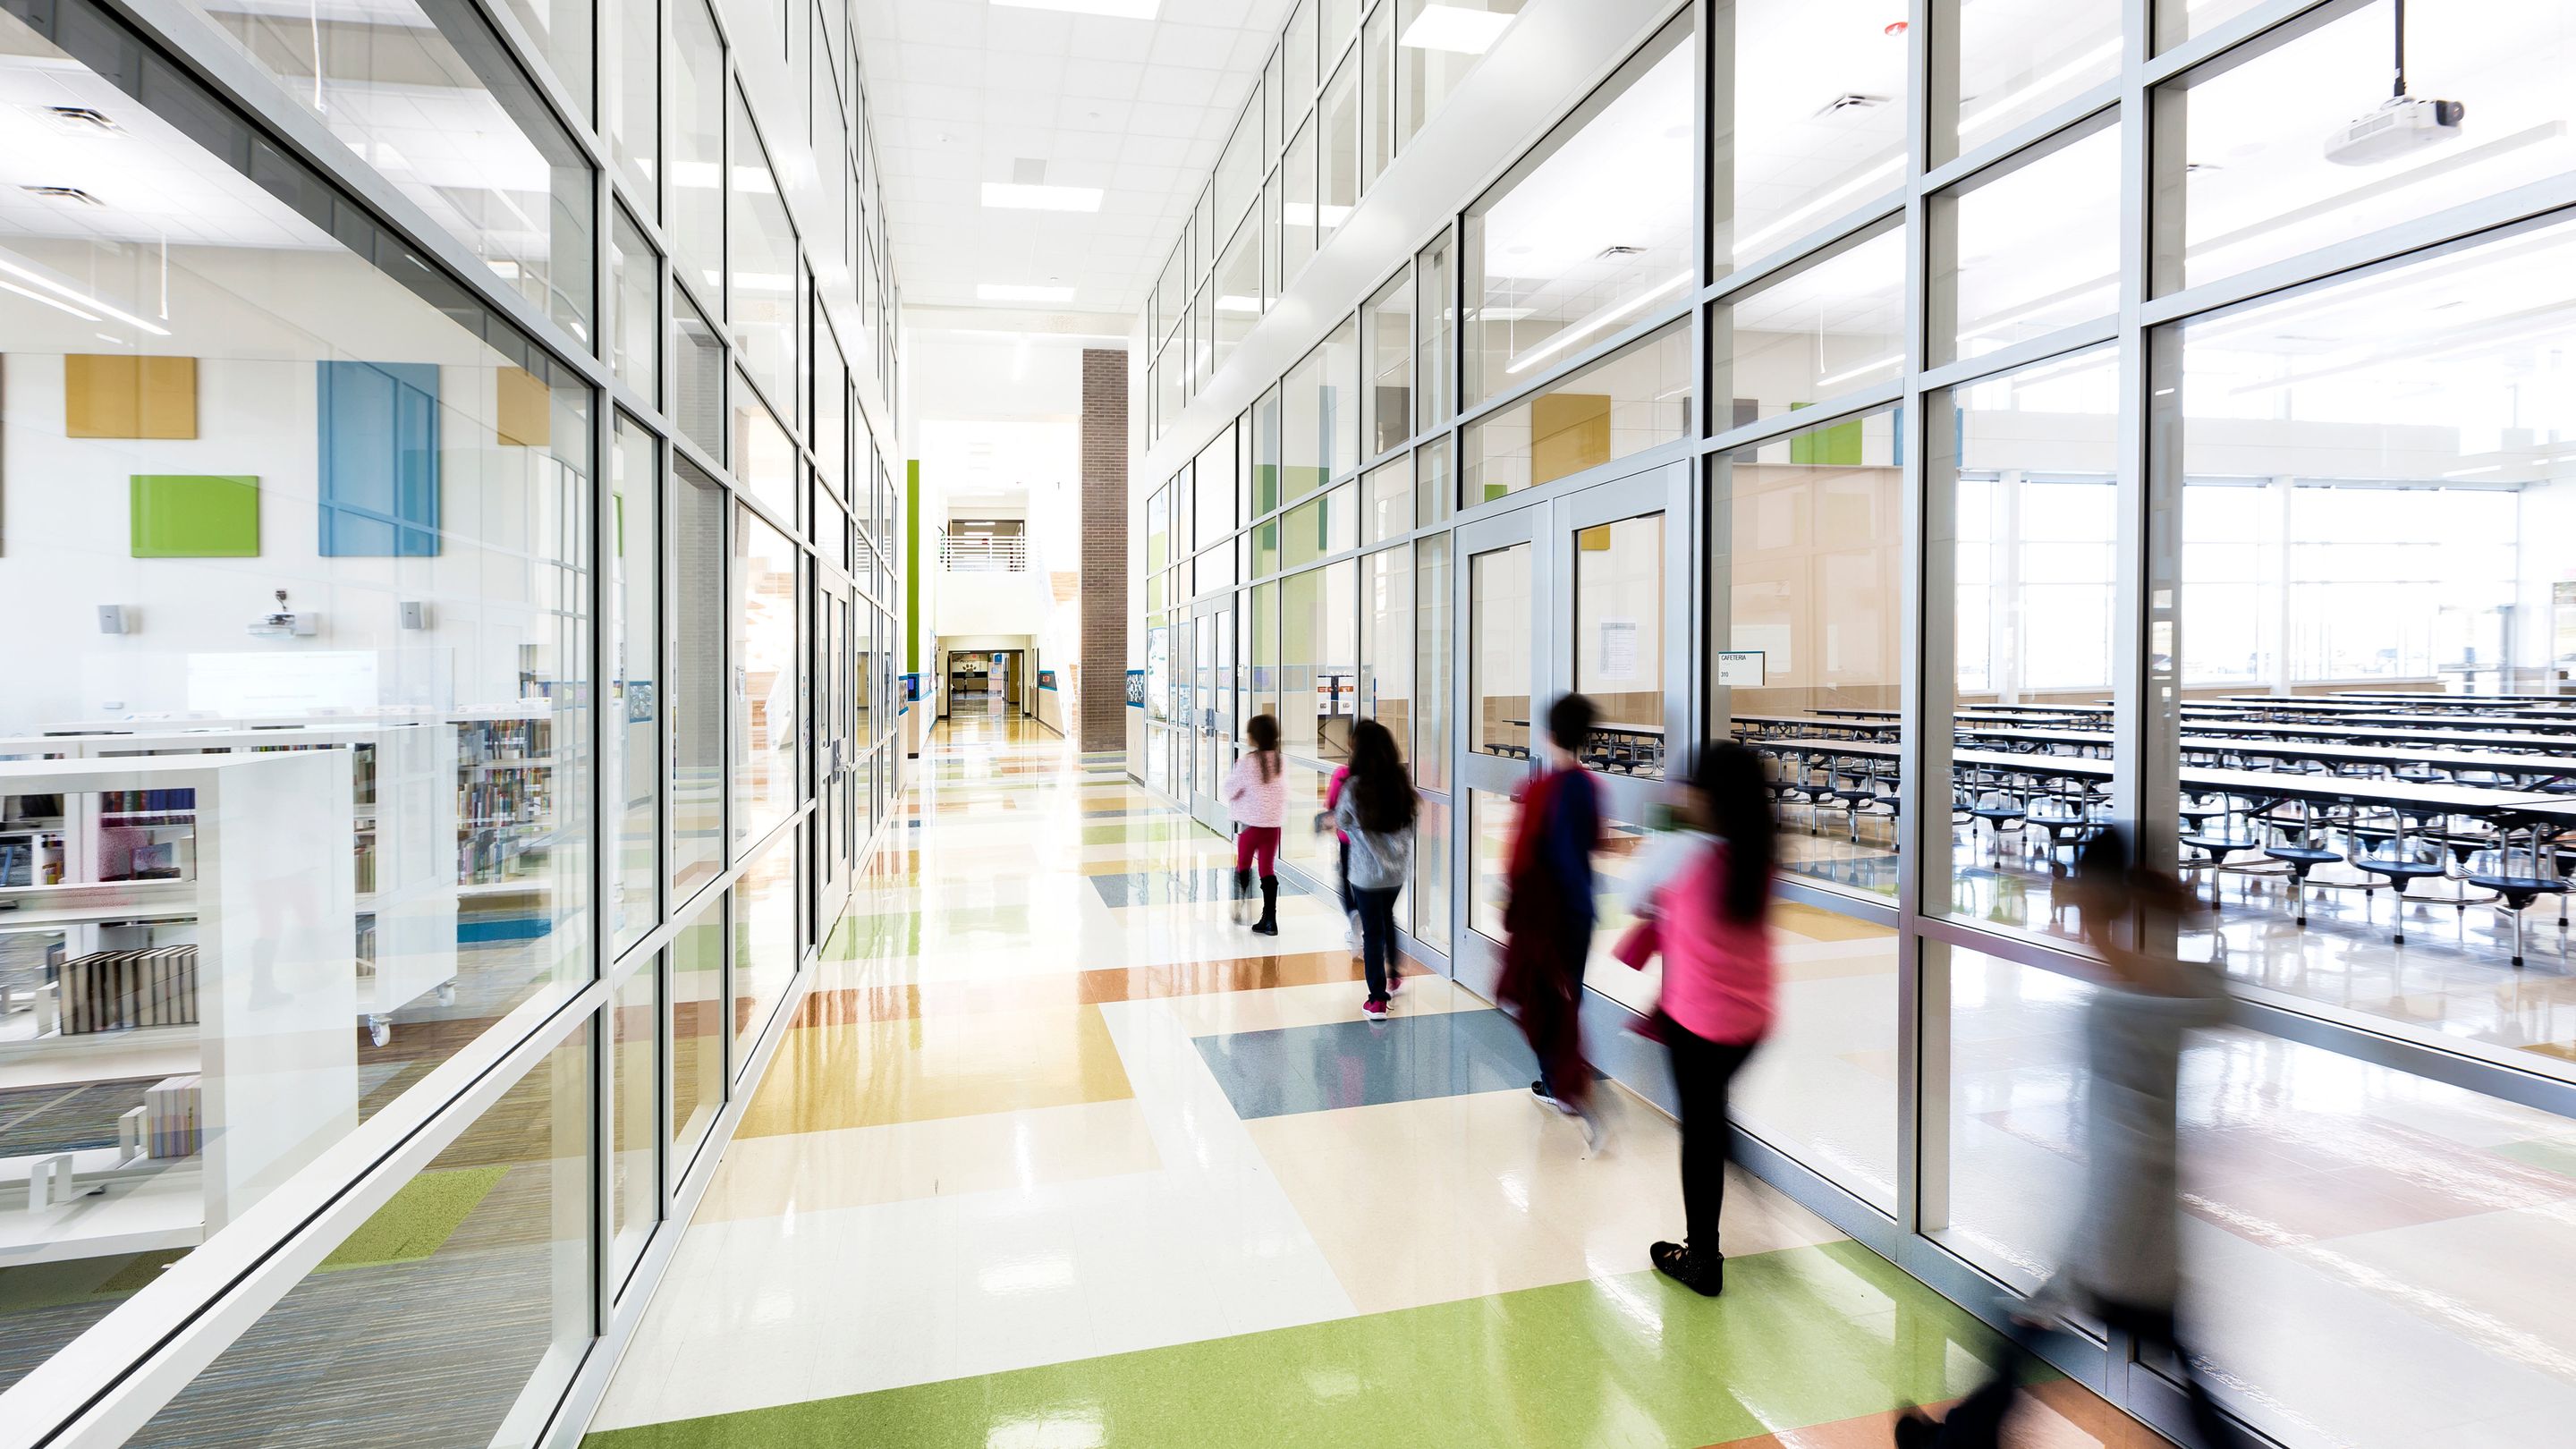 The Architecture of Ideal Learning Environments | Edutopia